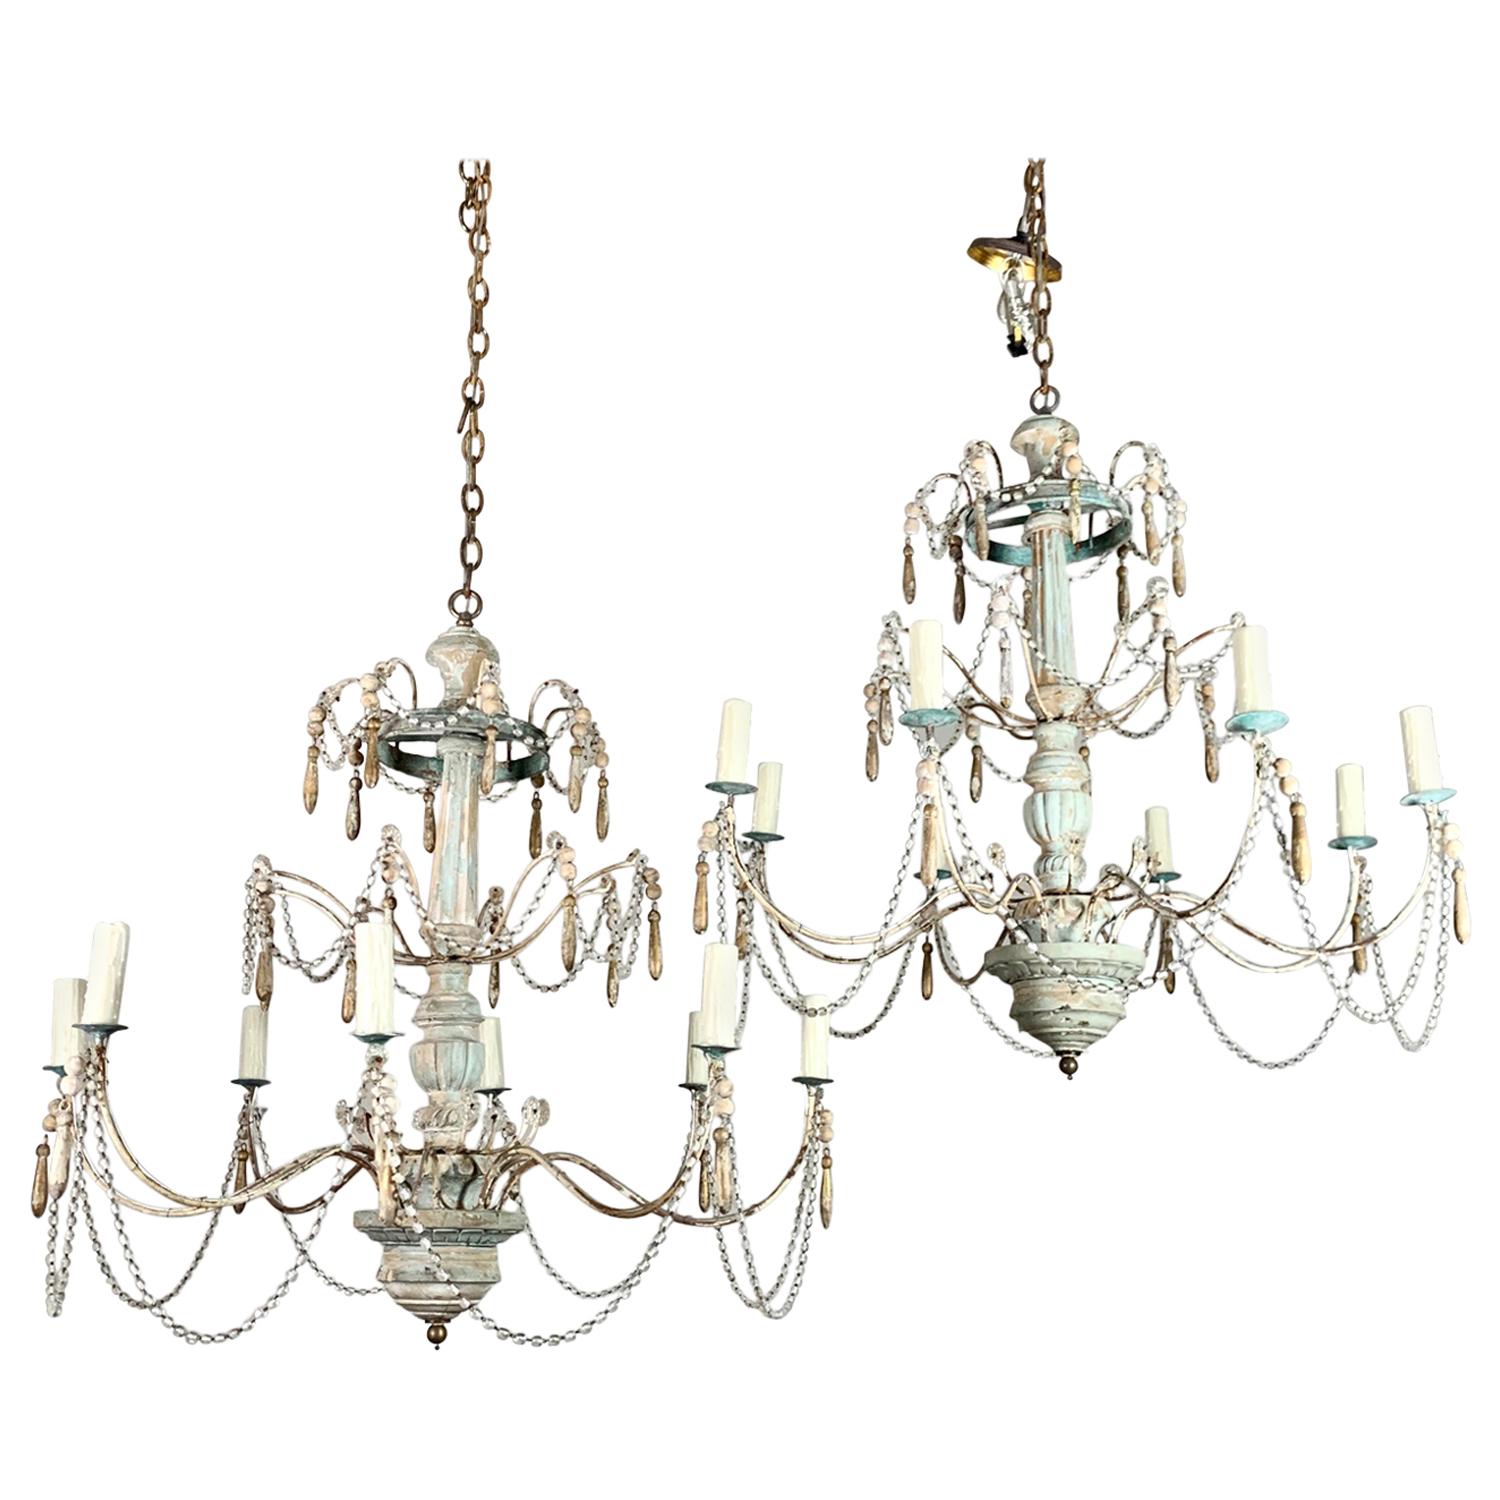 Pair of Painted Wood Beaded Chandeliers by MLA For Sale